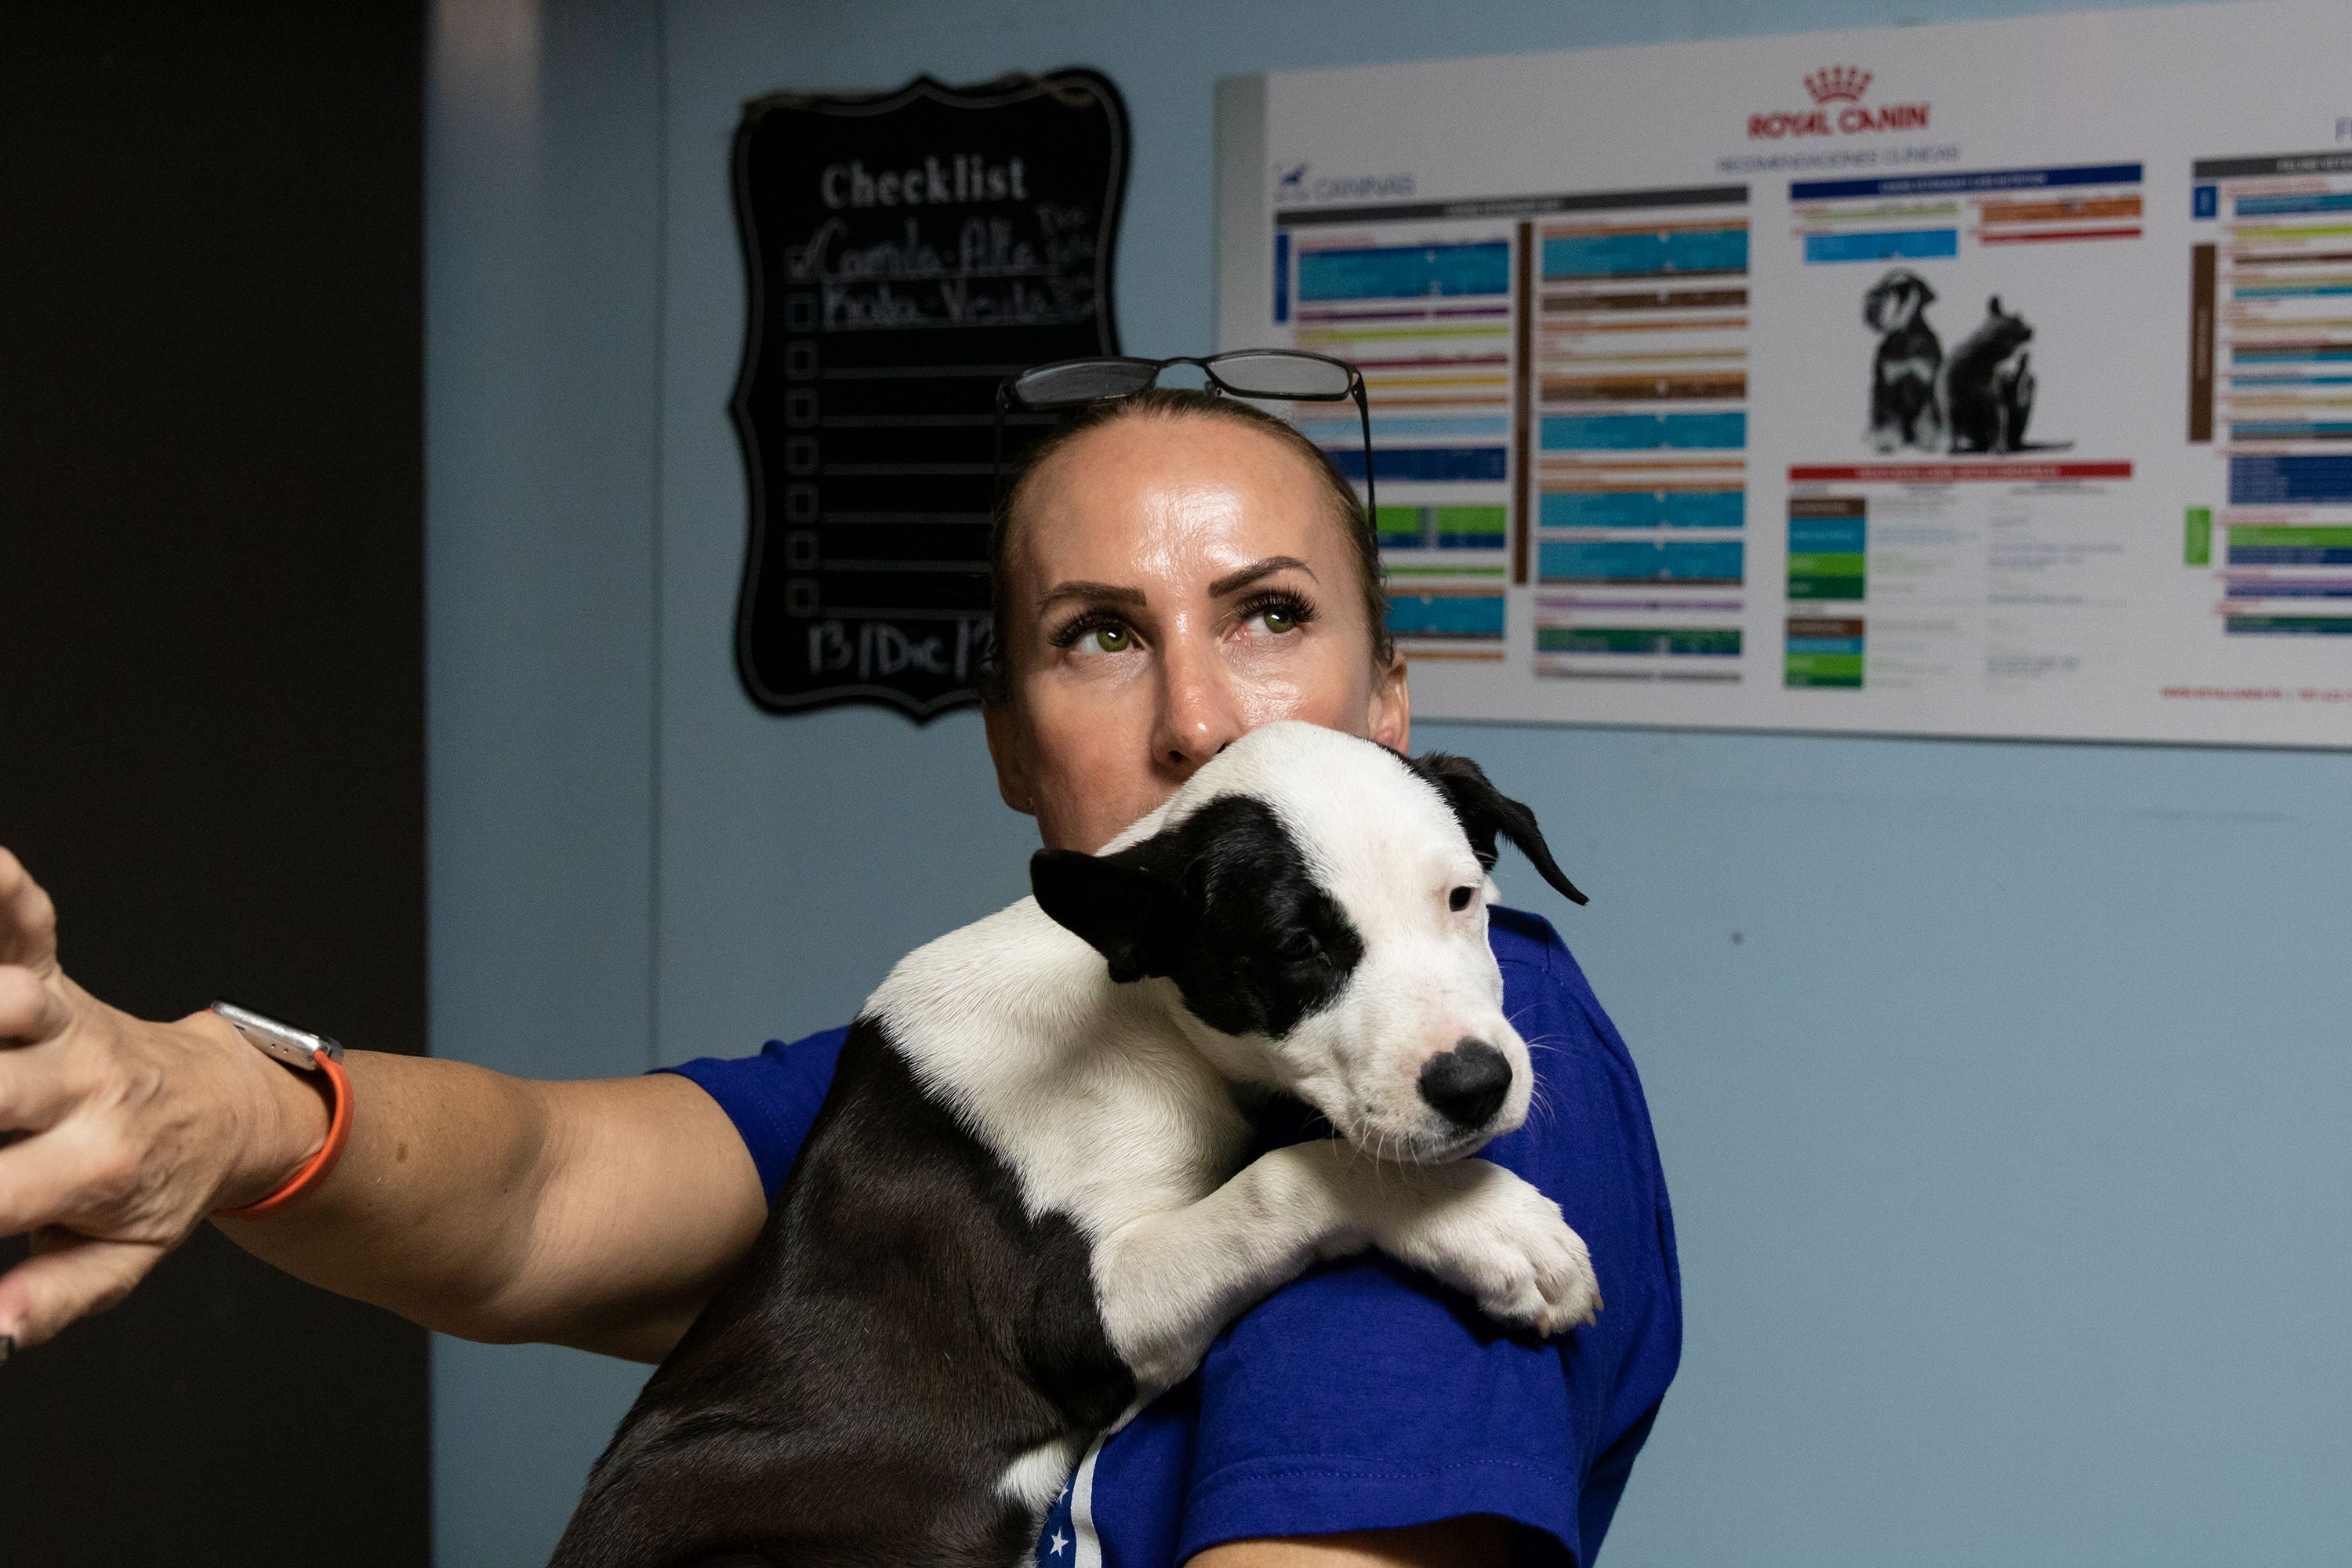 Chrissy Beckles, the founder of The SATO Project, checks in on one of her many dogs currently being treated at Candelero Animal Hospital in Humacao. Image by Jamie Holt. United States, 2019.